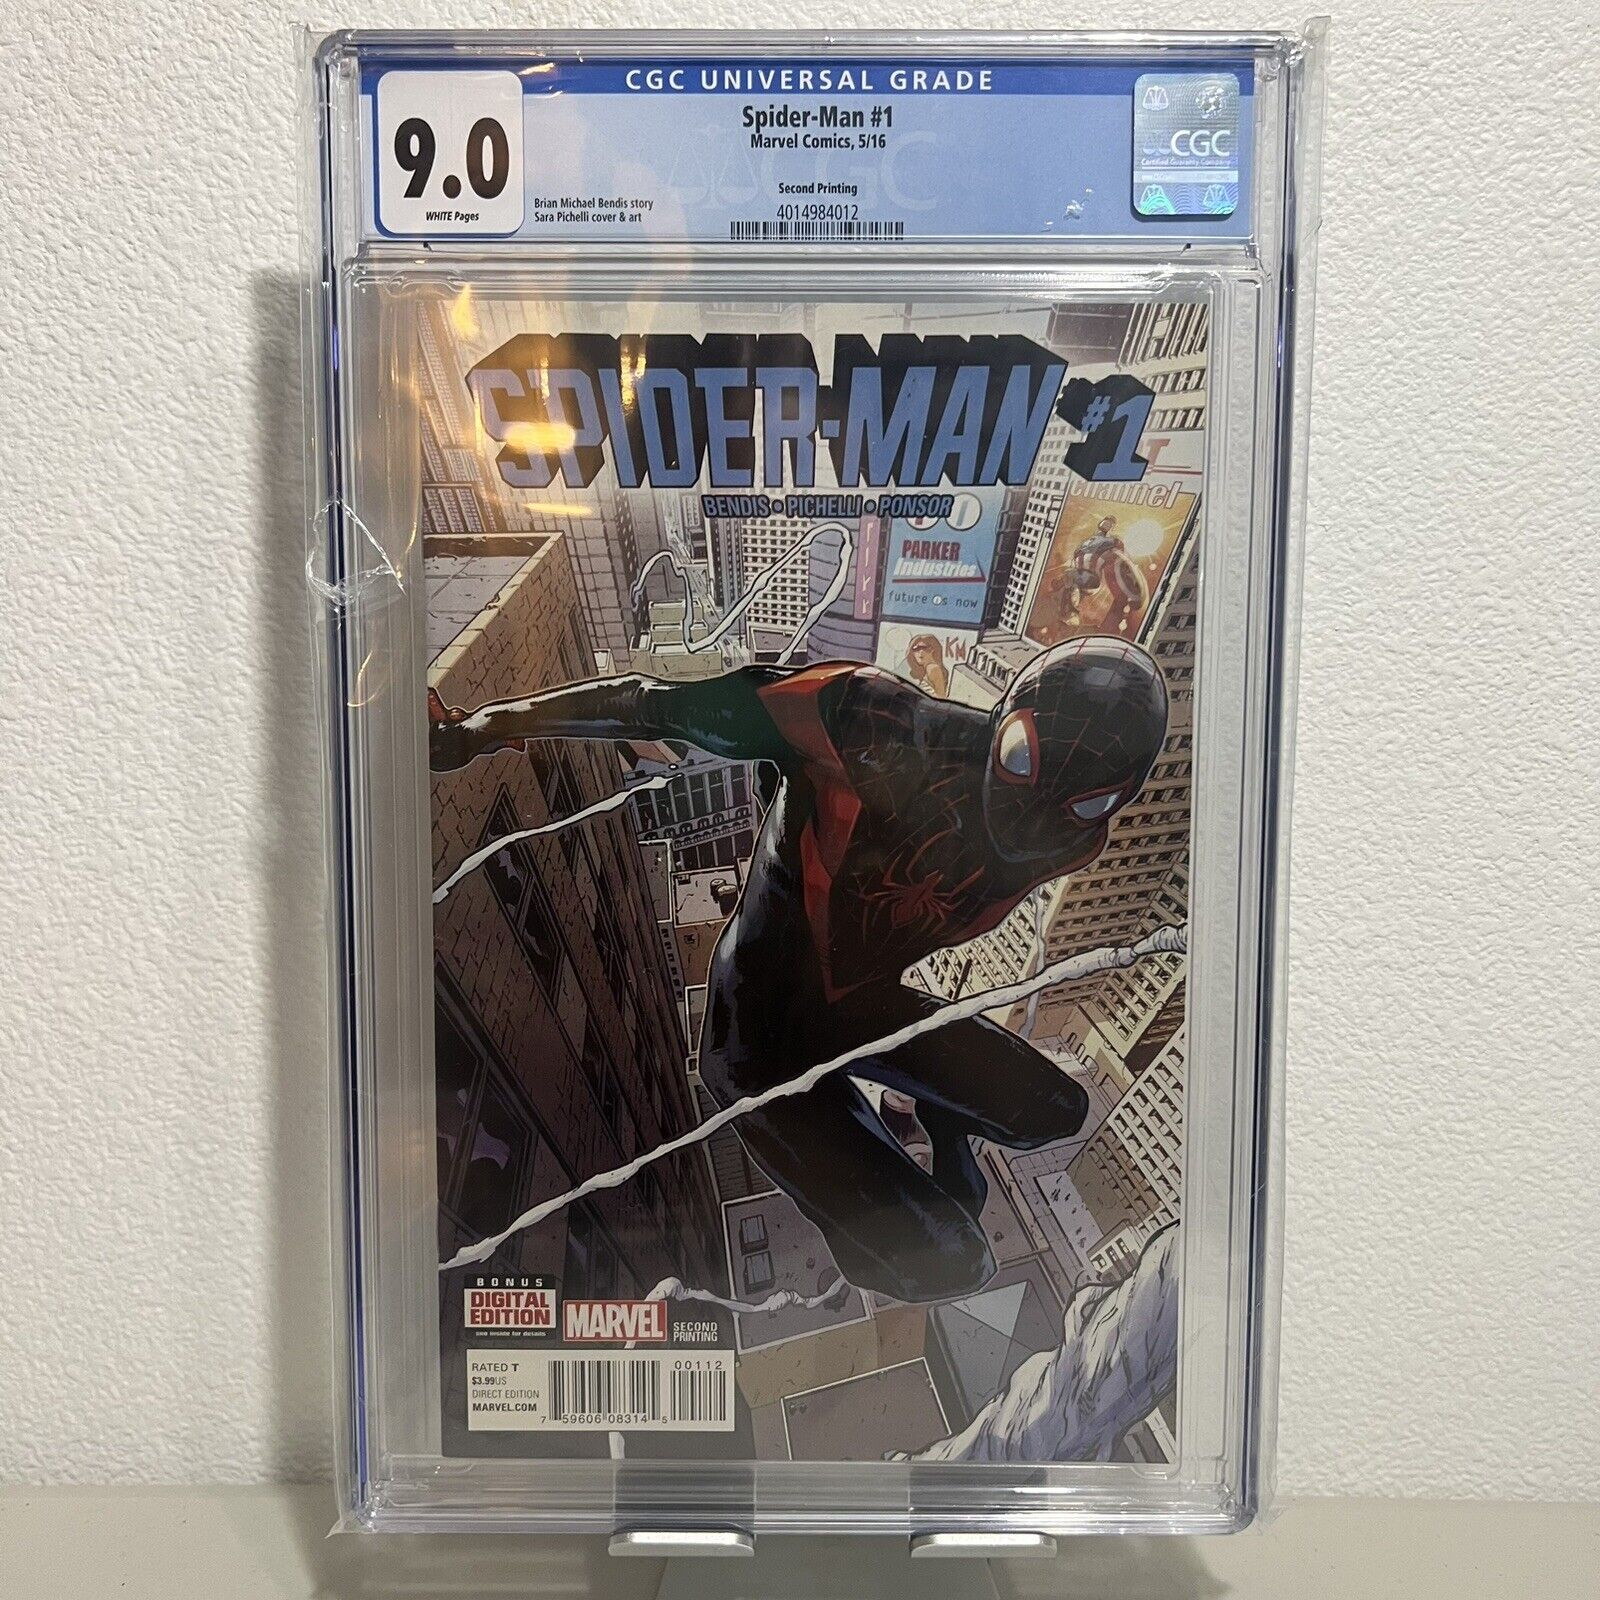 Spider-Man #1 3rd Ongoing Miles Morales 2nd Print Variant CGC 9.0 Marvel 2016